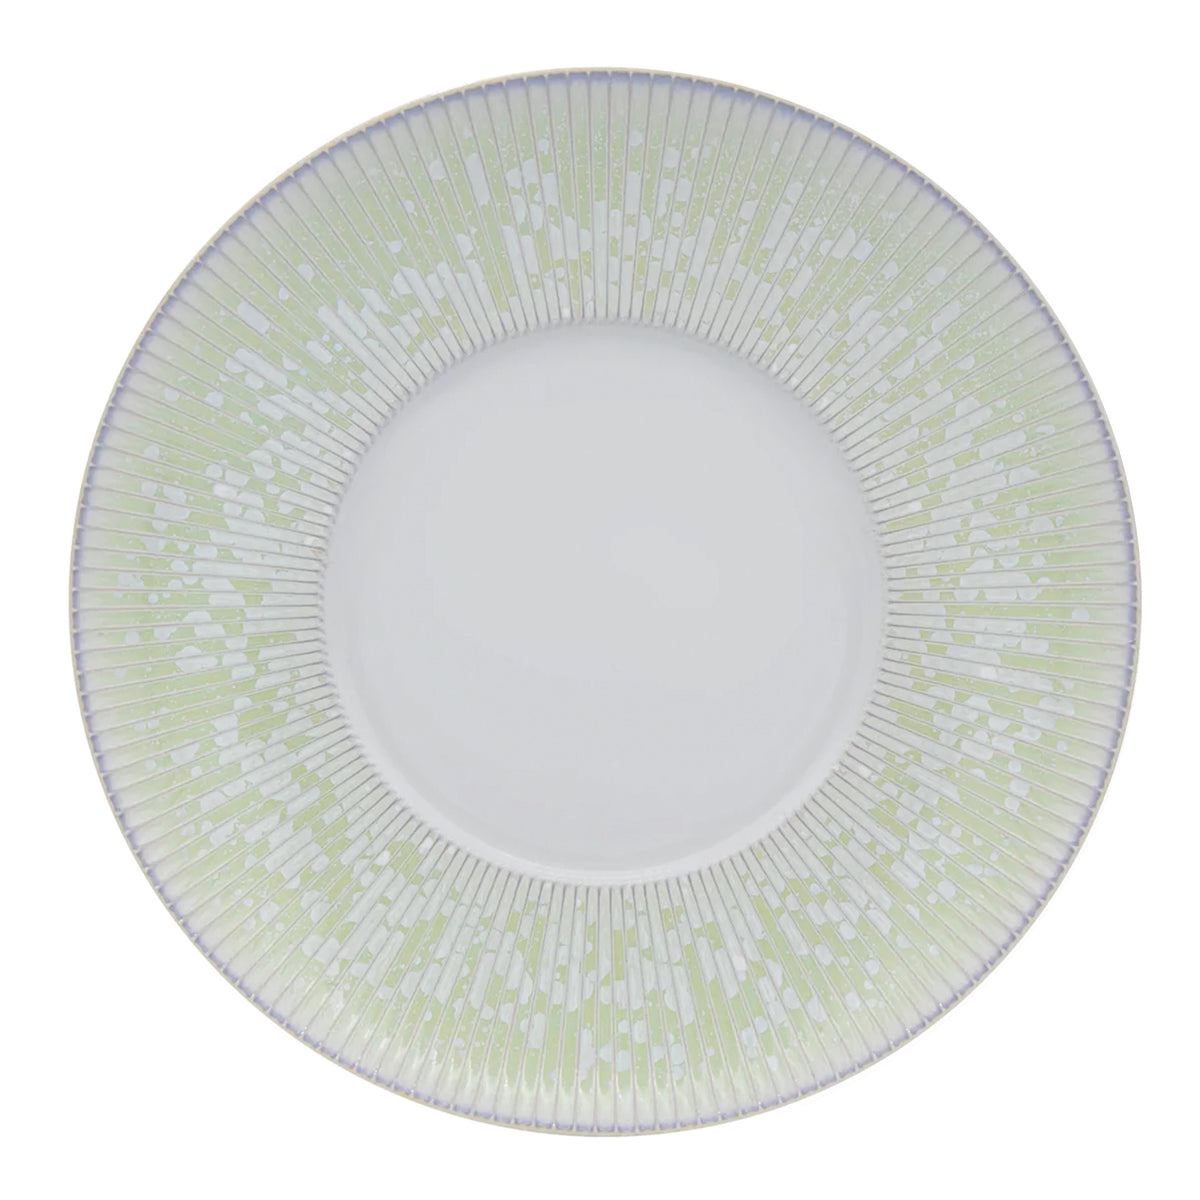 SONG Almond - Charger plate, Bolero